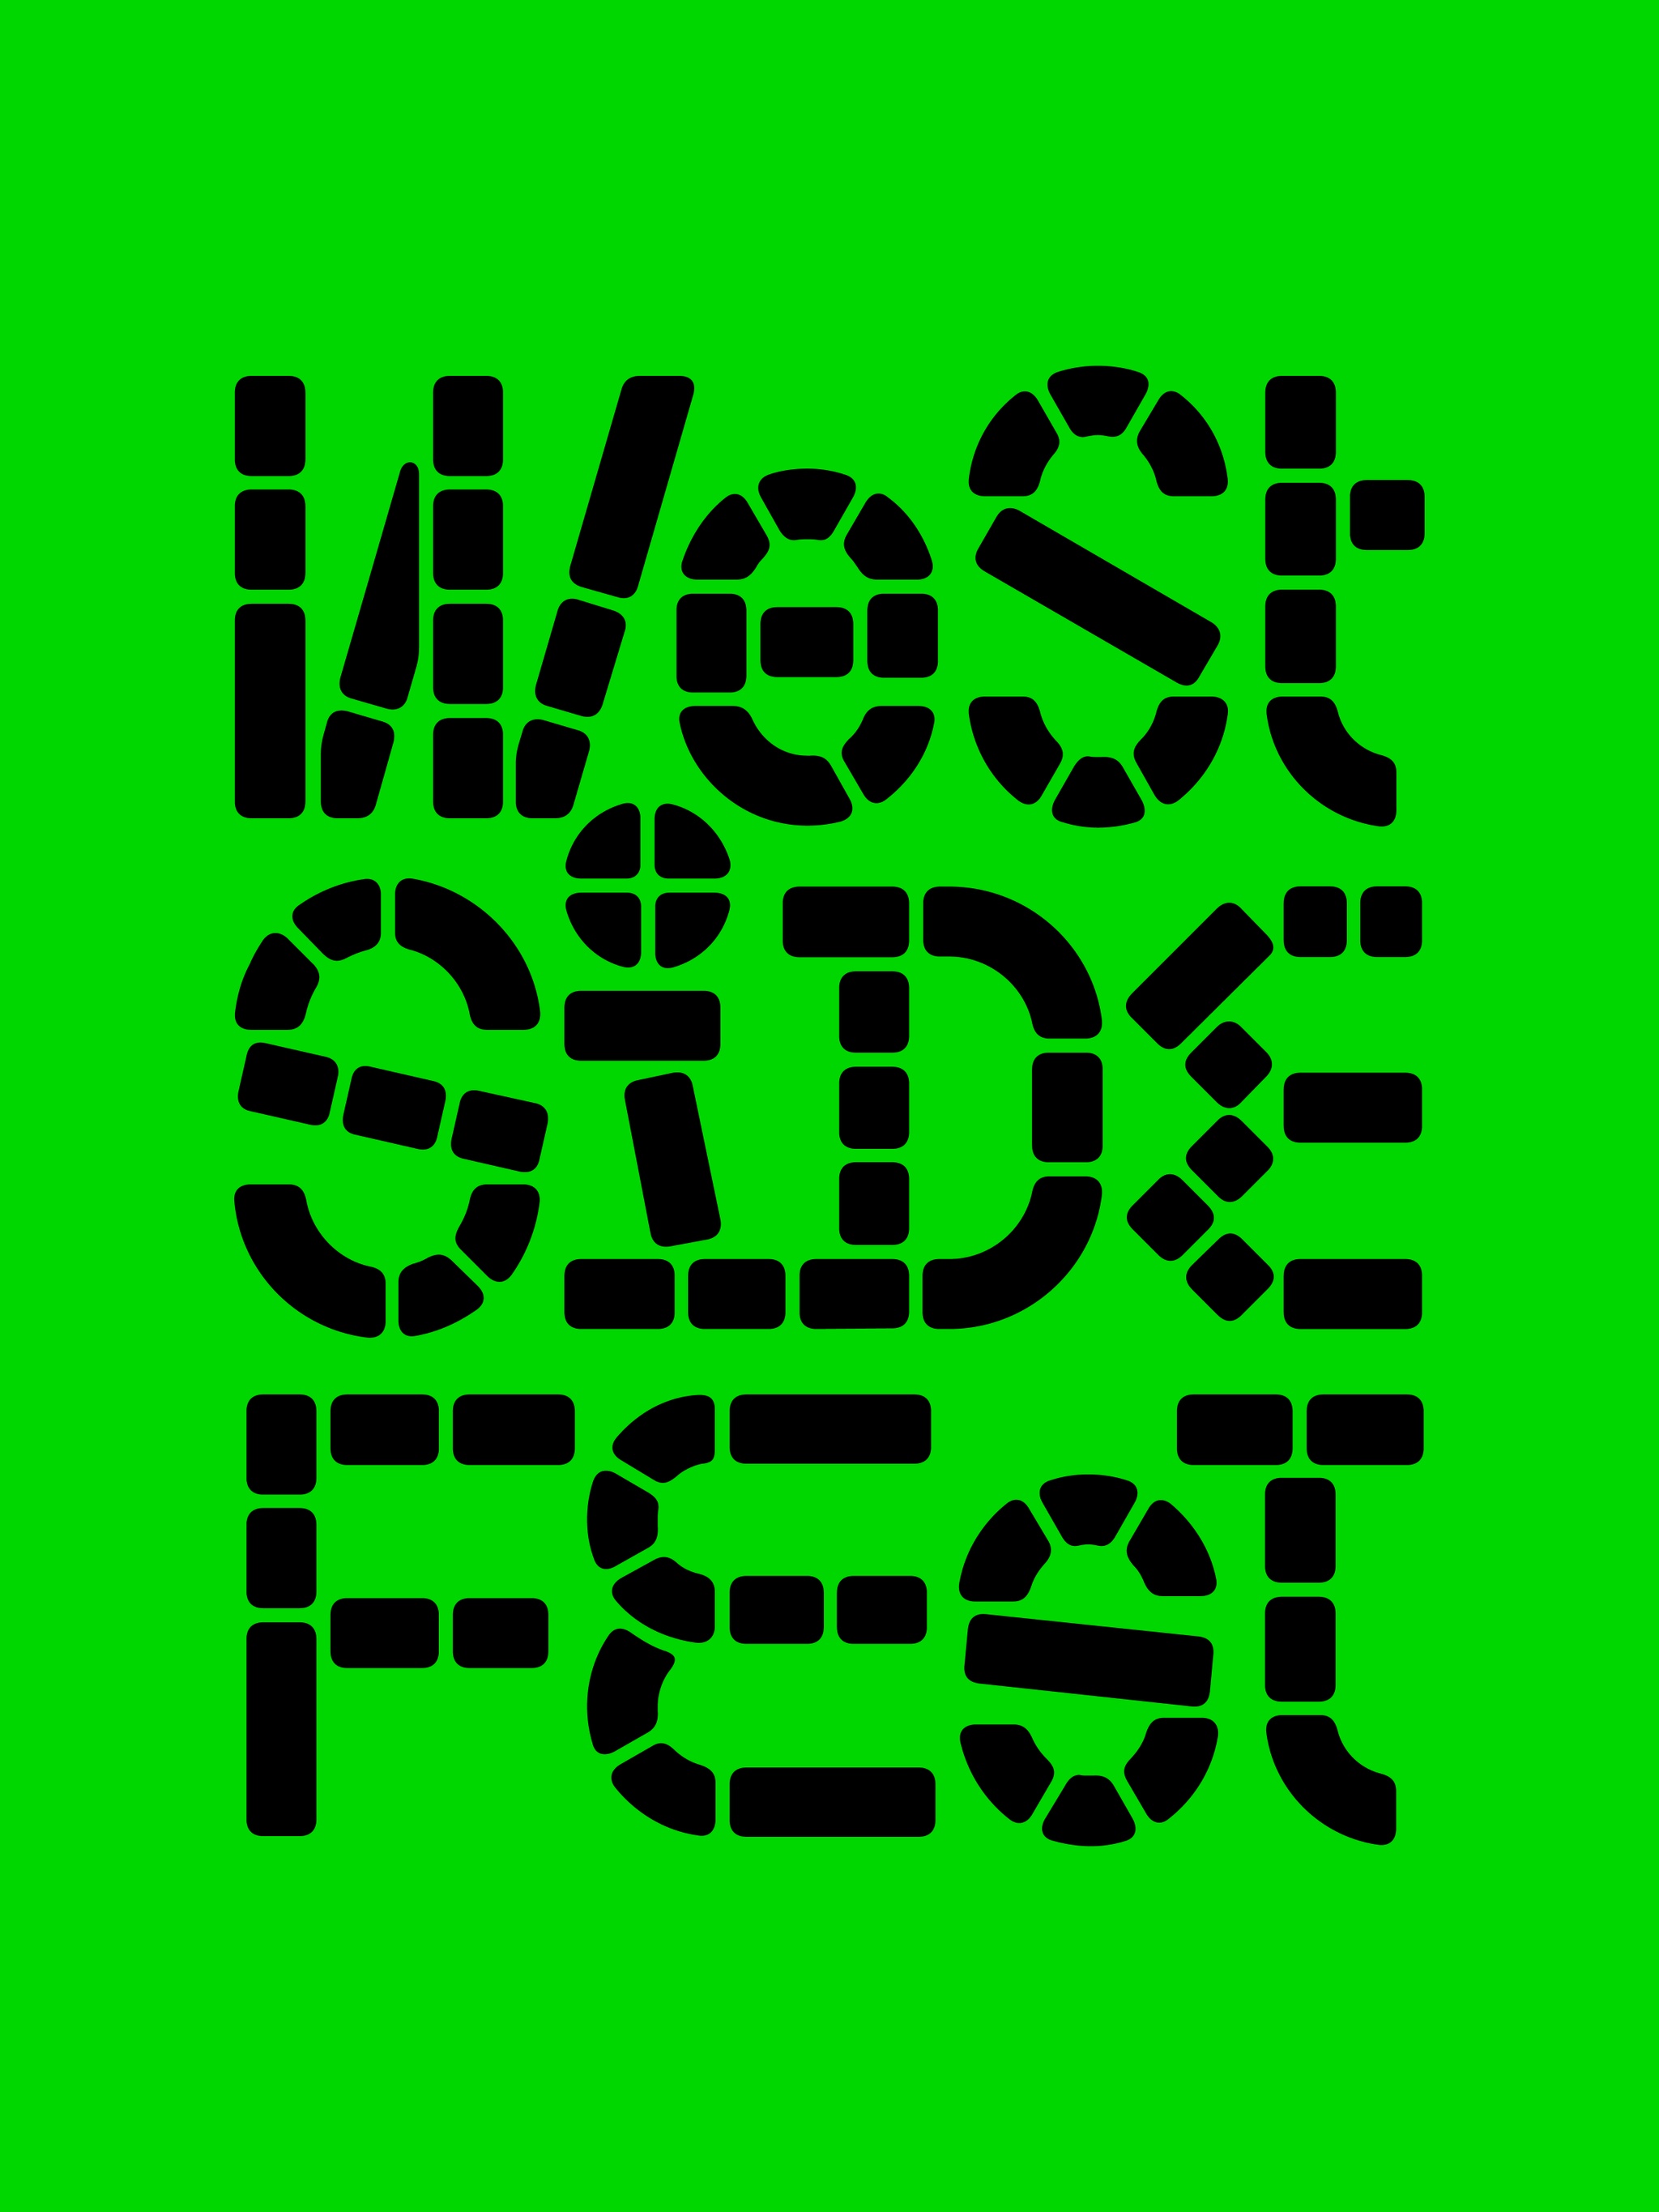 The event title West Side Fest on a lime green background. The letters are made of individual squares that resemble cobblestones. 